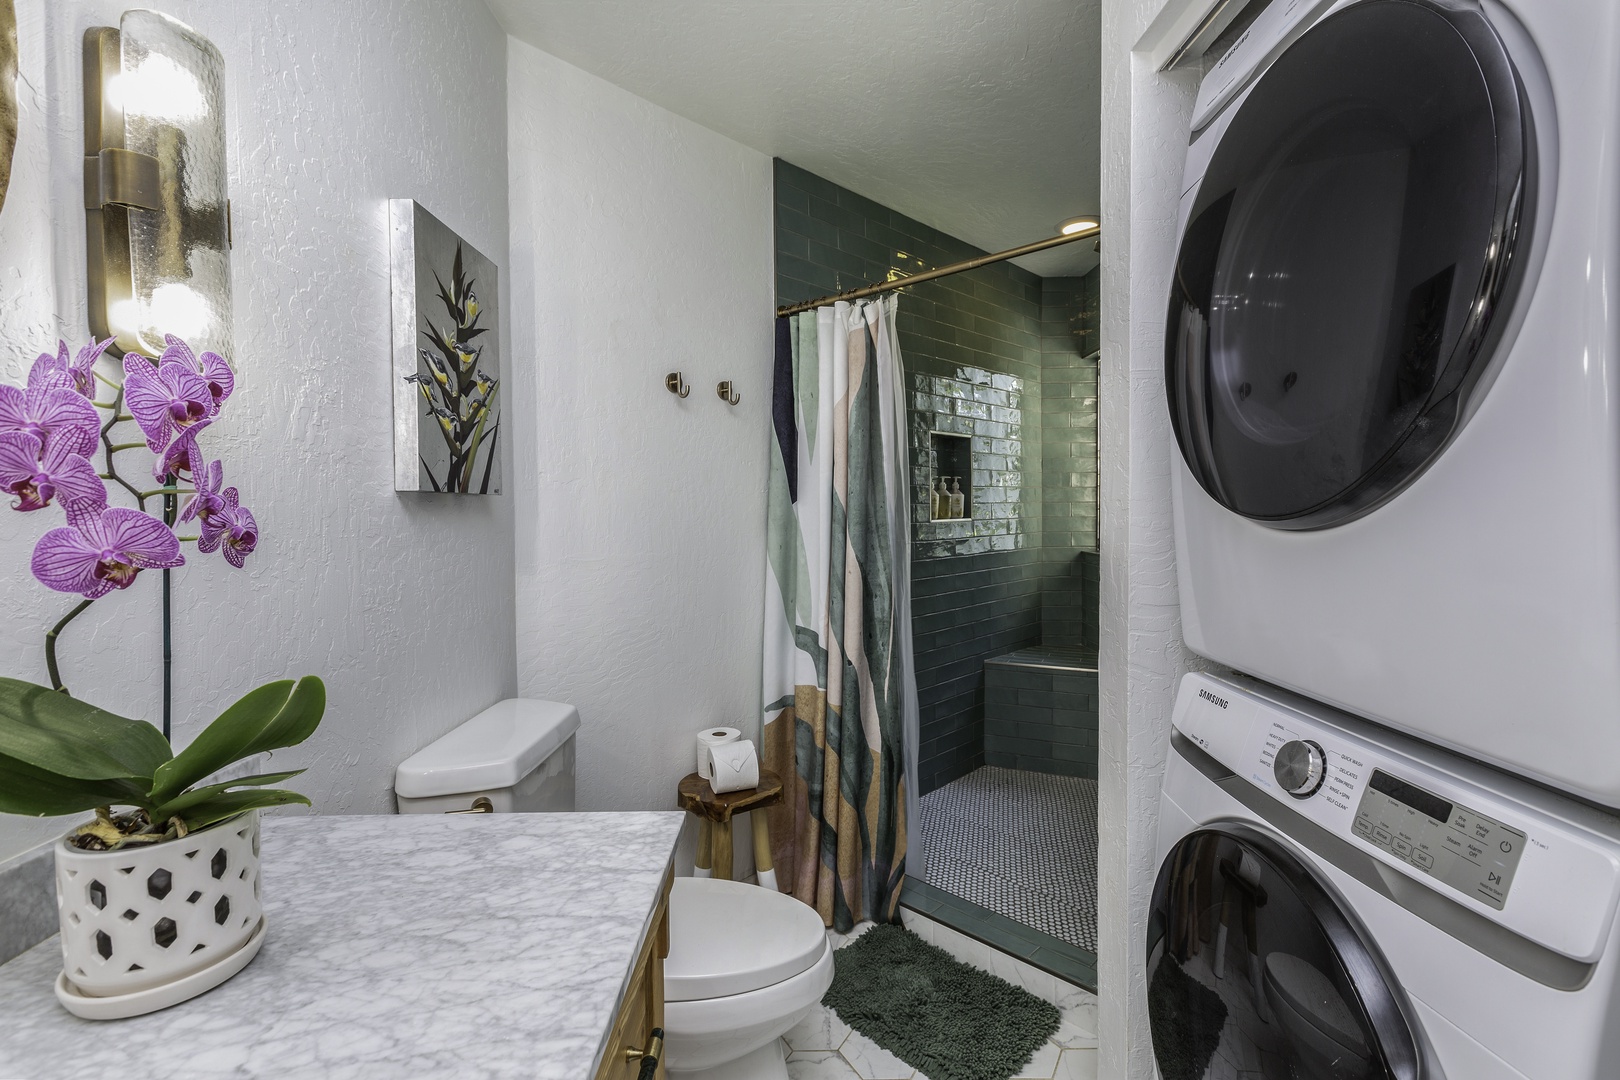 Princeville Vacation Rentals, Pali Ke Kua 207 - Washer and and dryer in the bathroom